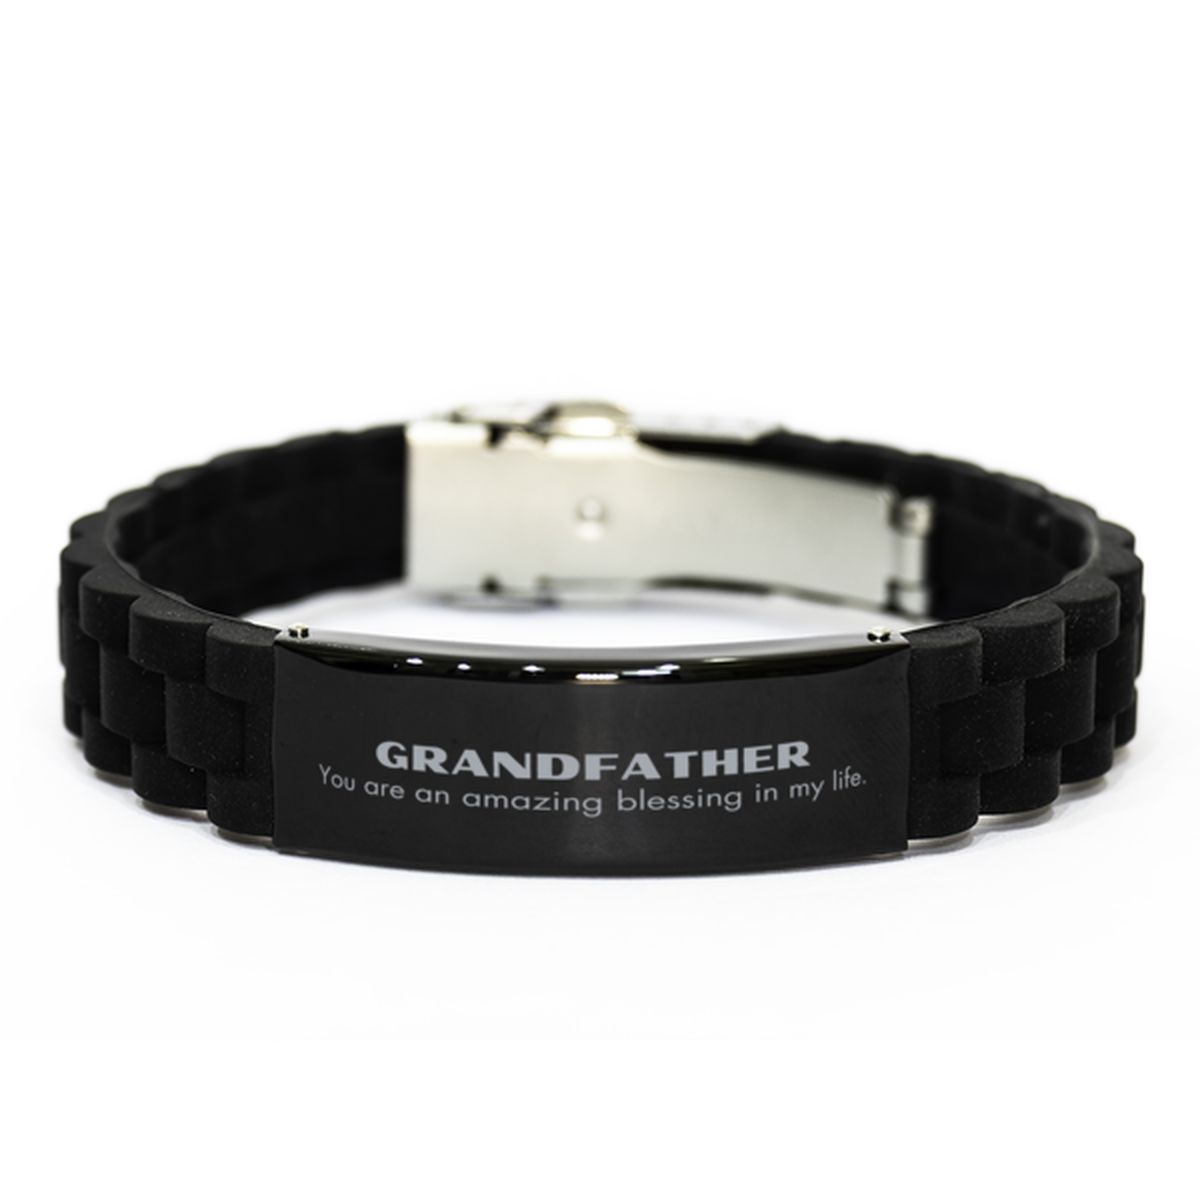 Grandfather Black Glidelock Clasp Bracelet, You are an amazing blessing in my life, Thank You Gifts For Grandfather, Inspirational Birthday Christmas Unique Gifts For Grandfather